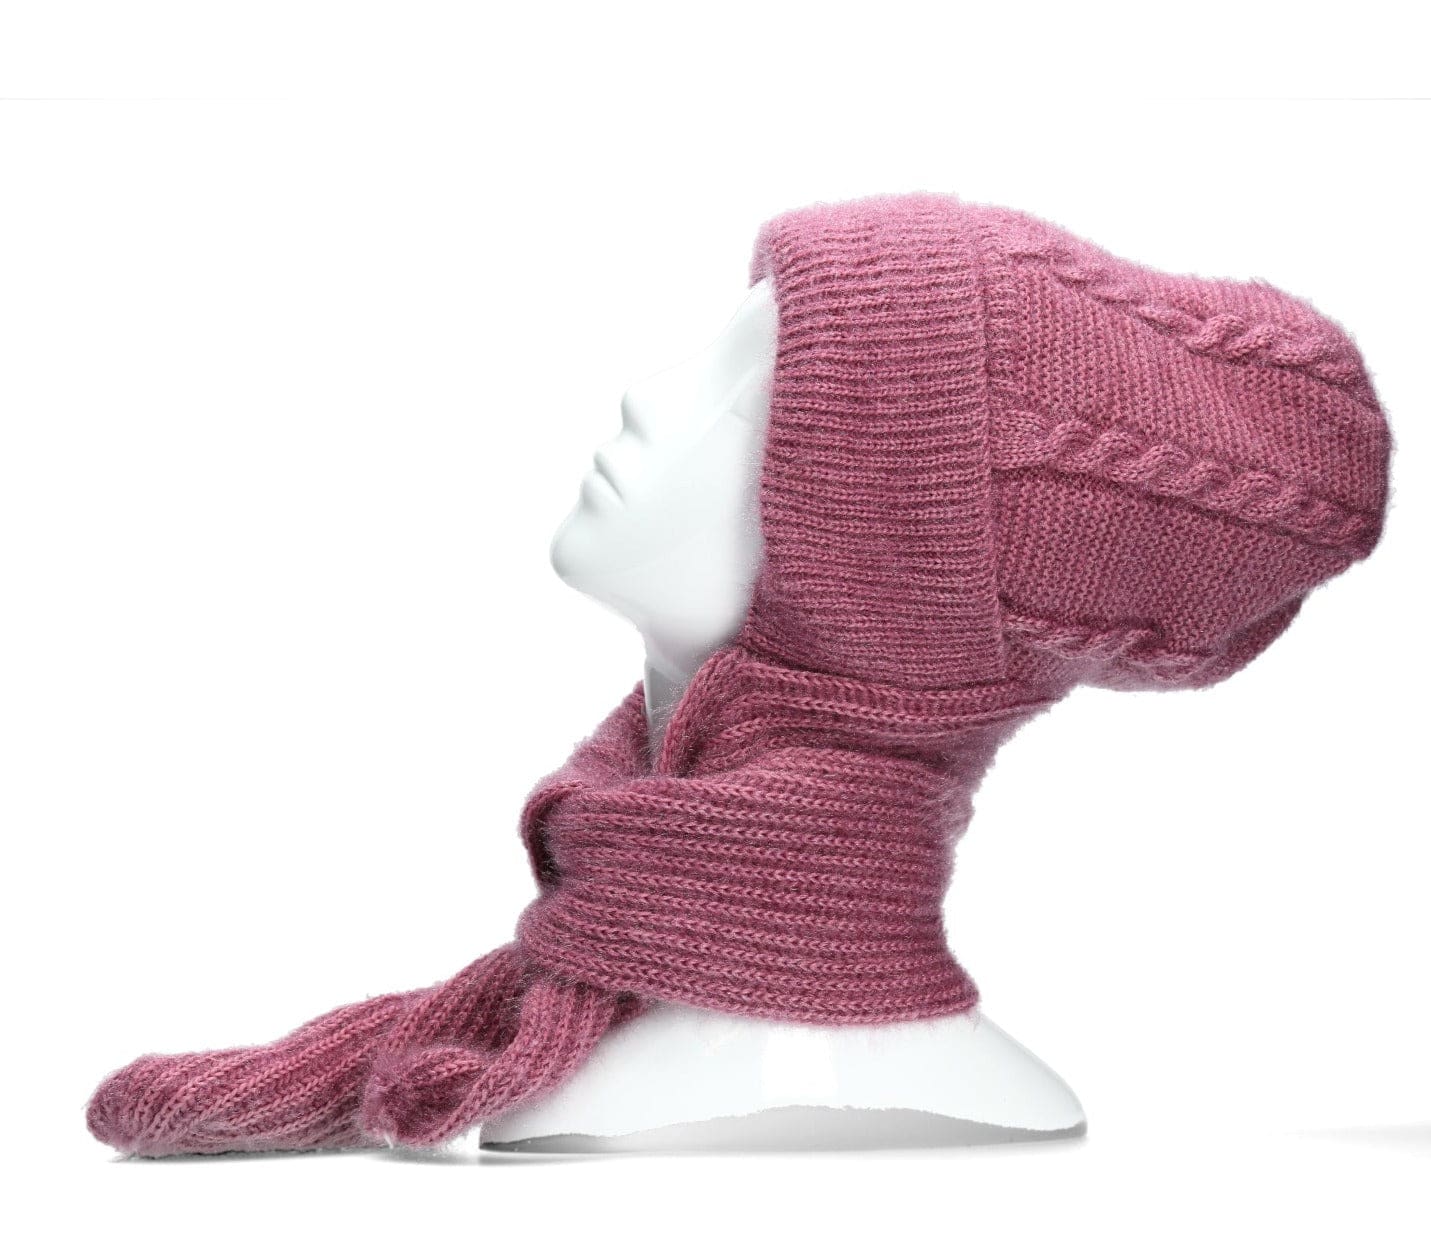 Exclusivity Hooded Scarf - Pink - Hats